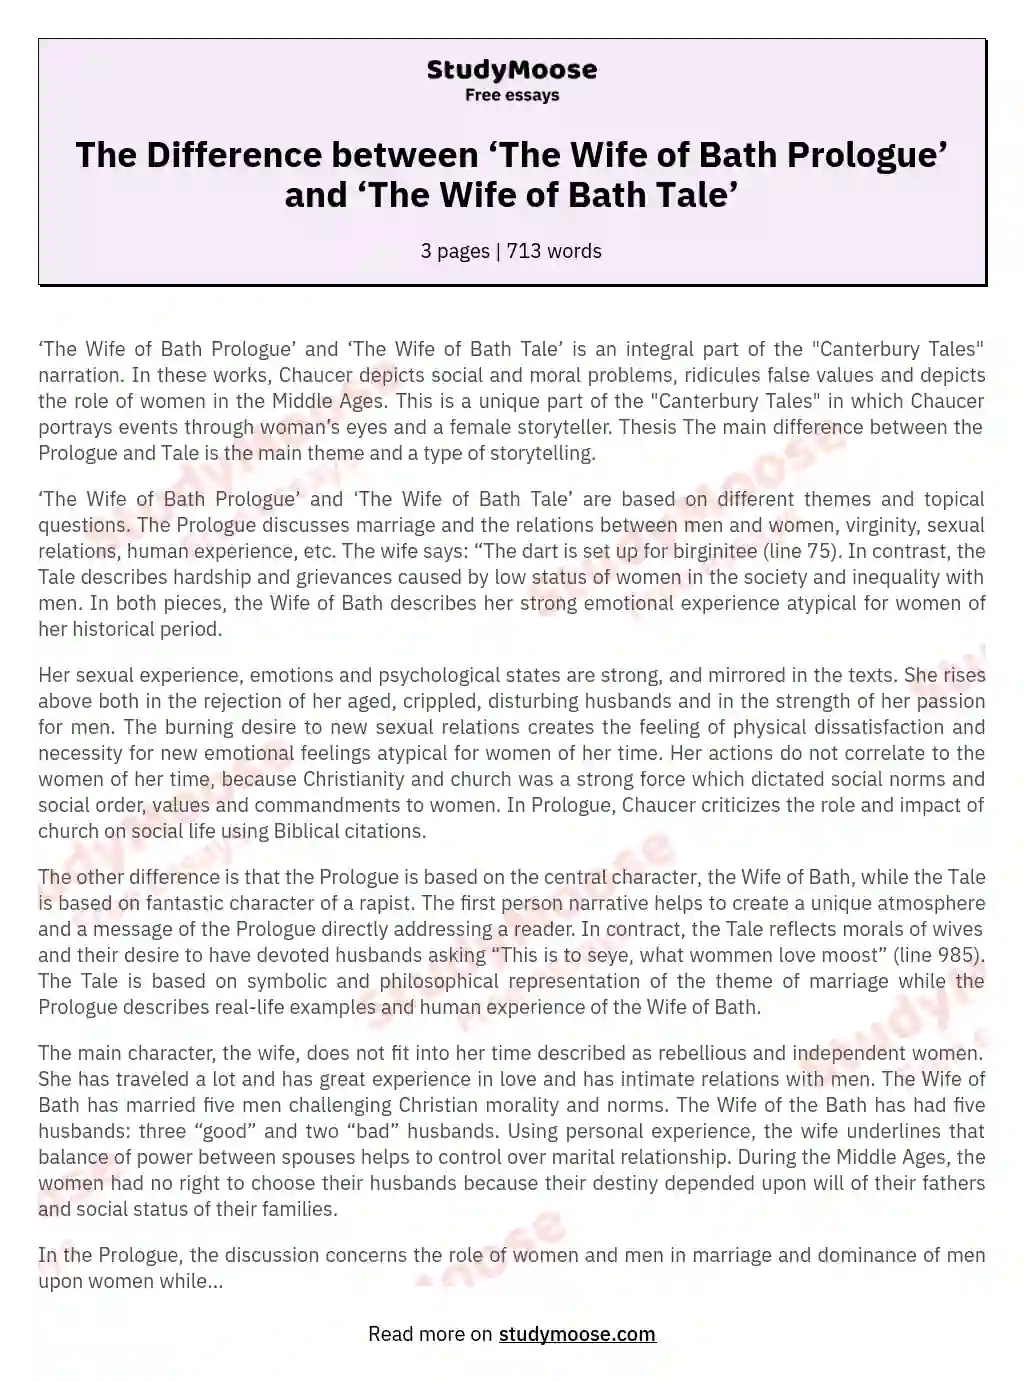 The Difference between ‘The Wife of Bath Prologue’ and ‘The Wife of Bath Tale’